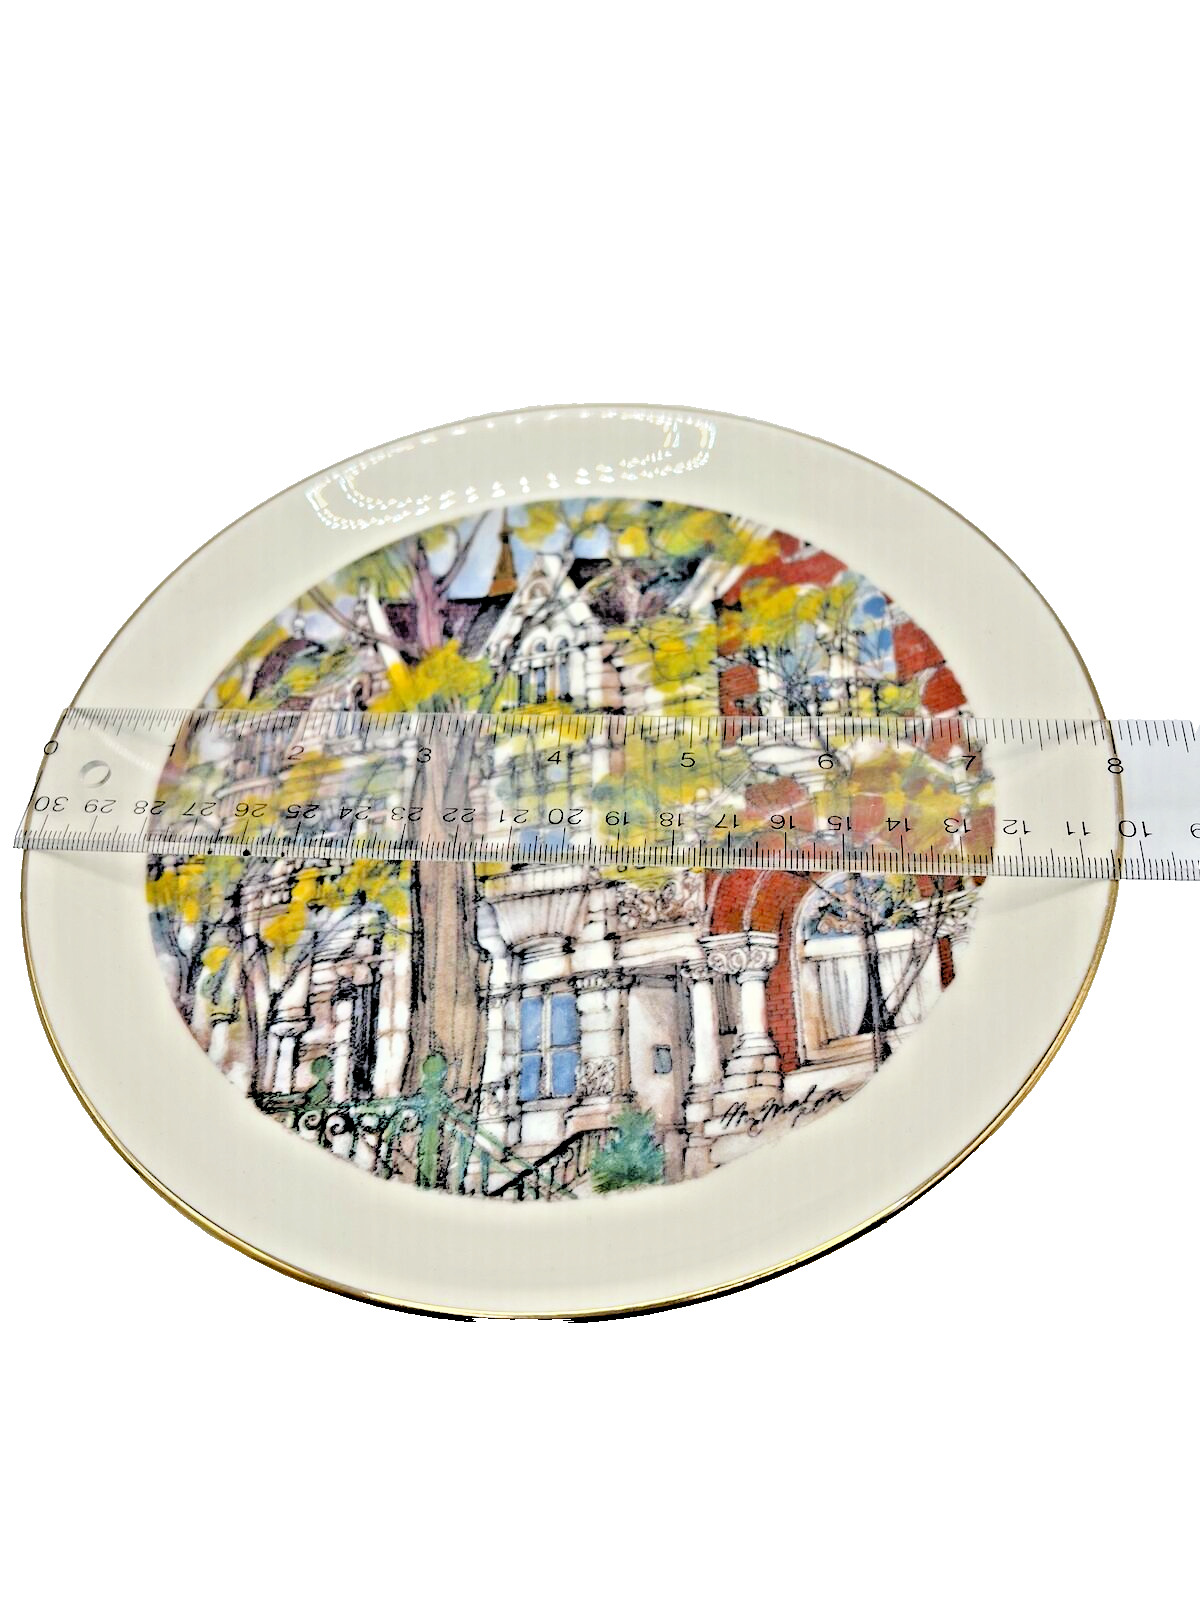 Franklin McMahon Plate Chicago’s Neighborhoods Collector Dish 1980 Made in USA